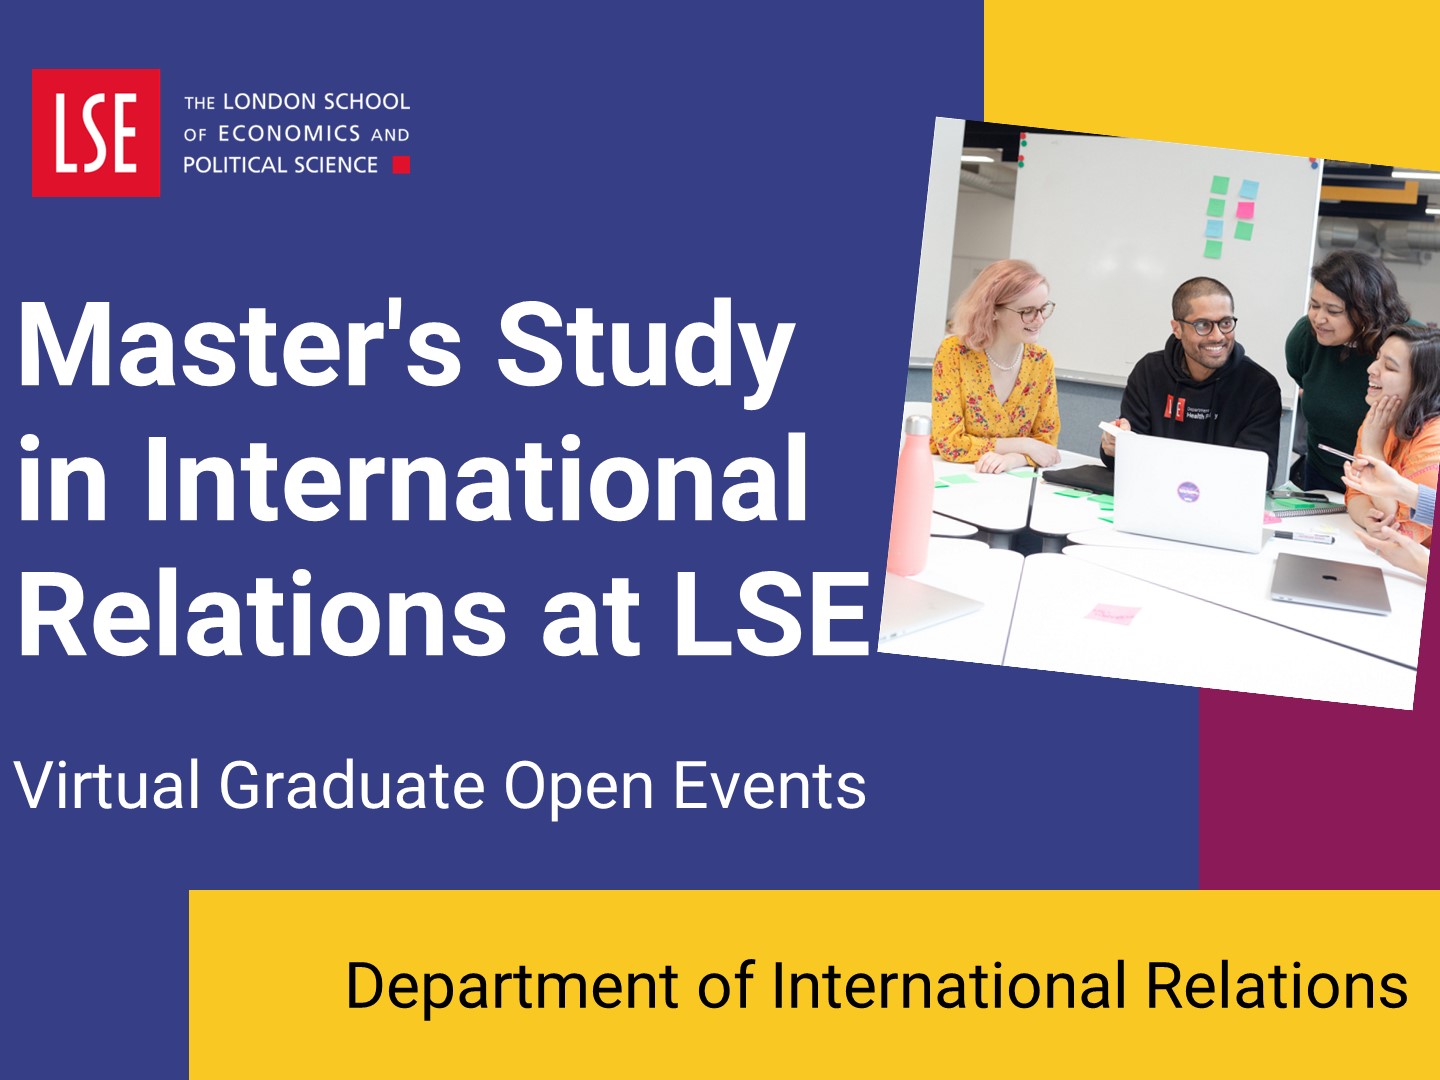 Introduction to master's study in International Relations at LSE